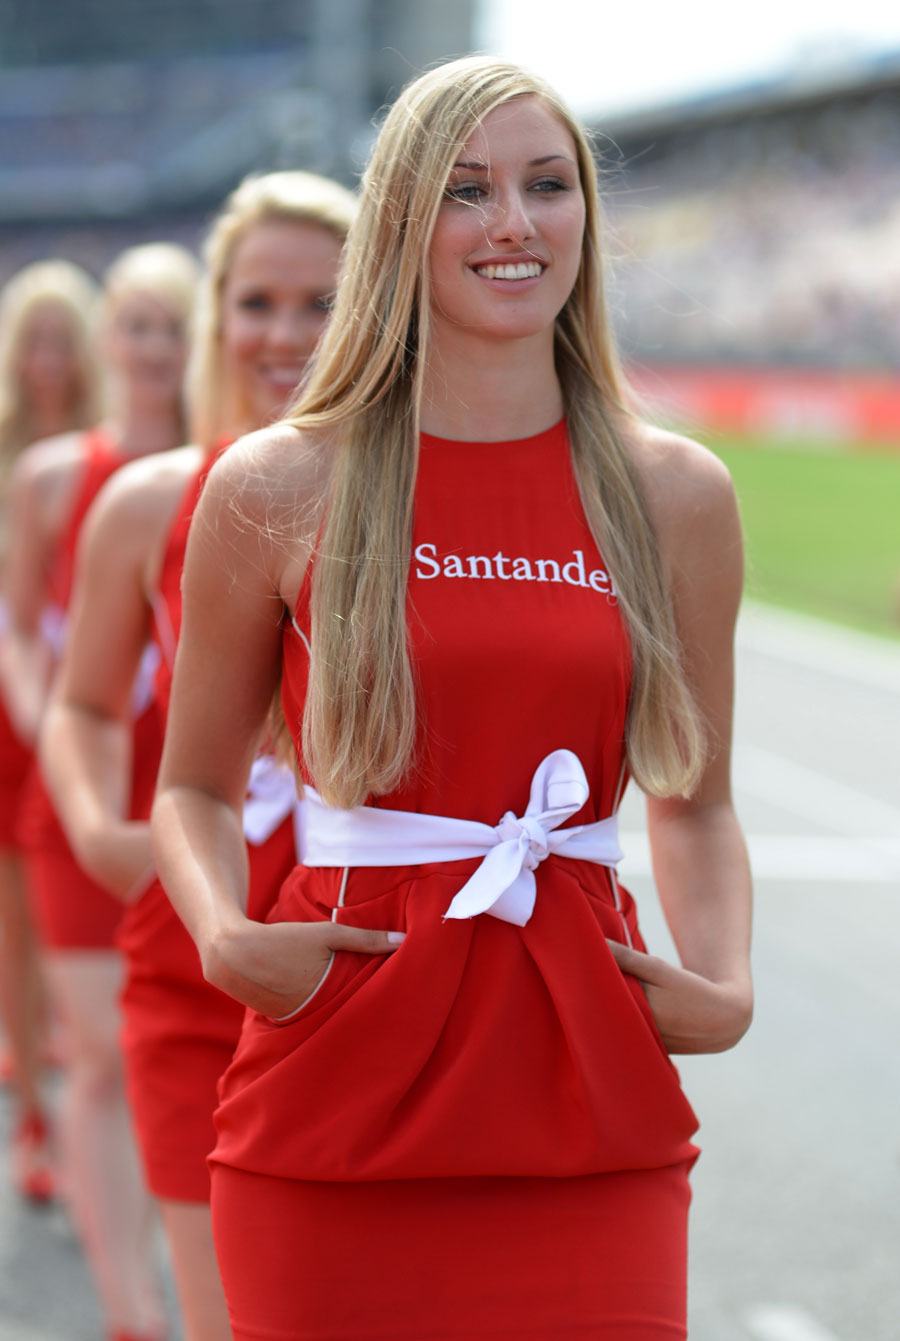 A grid girl on track ahead of the start of the race